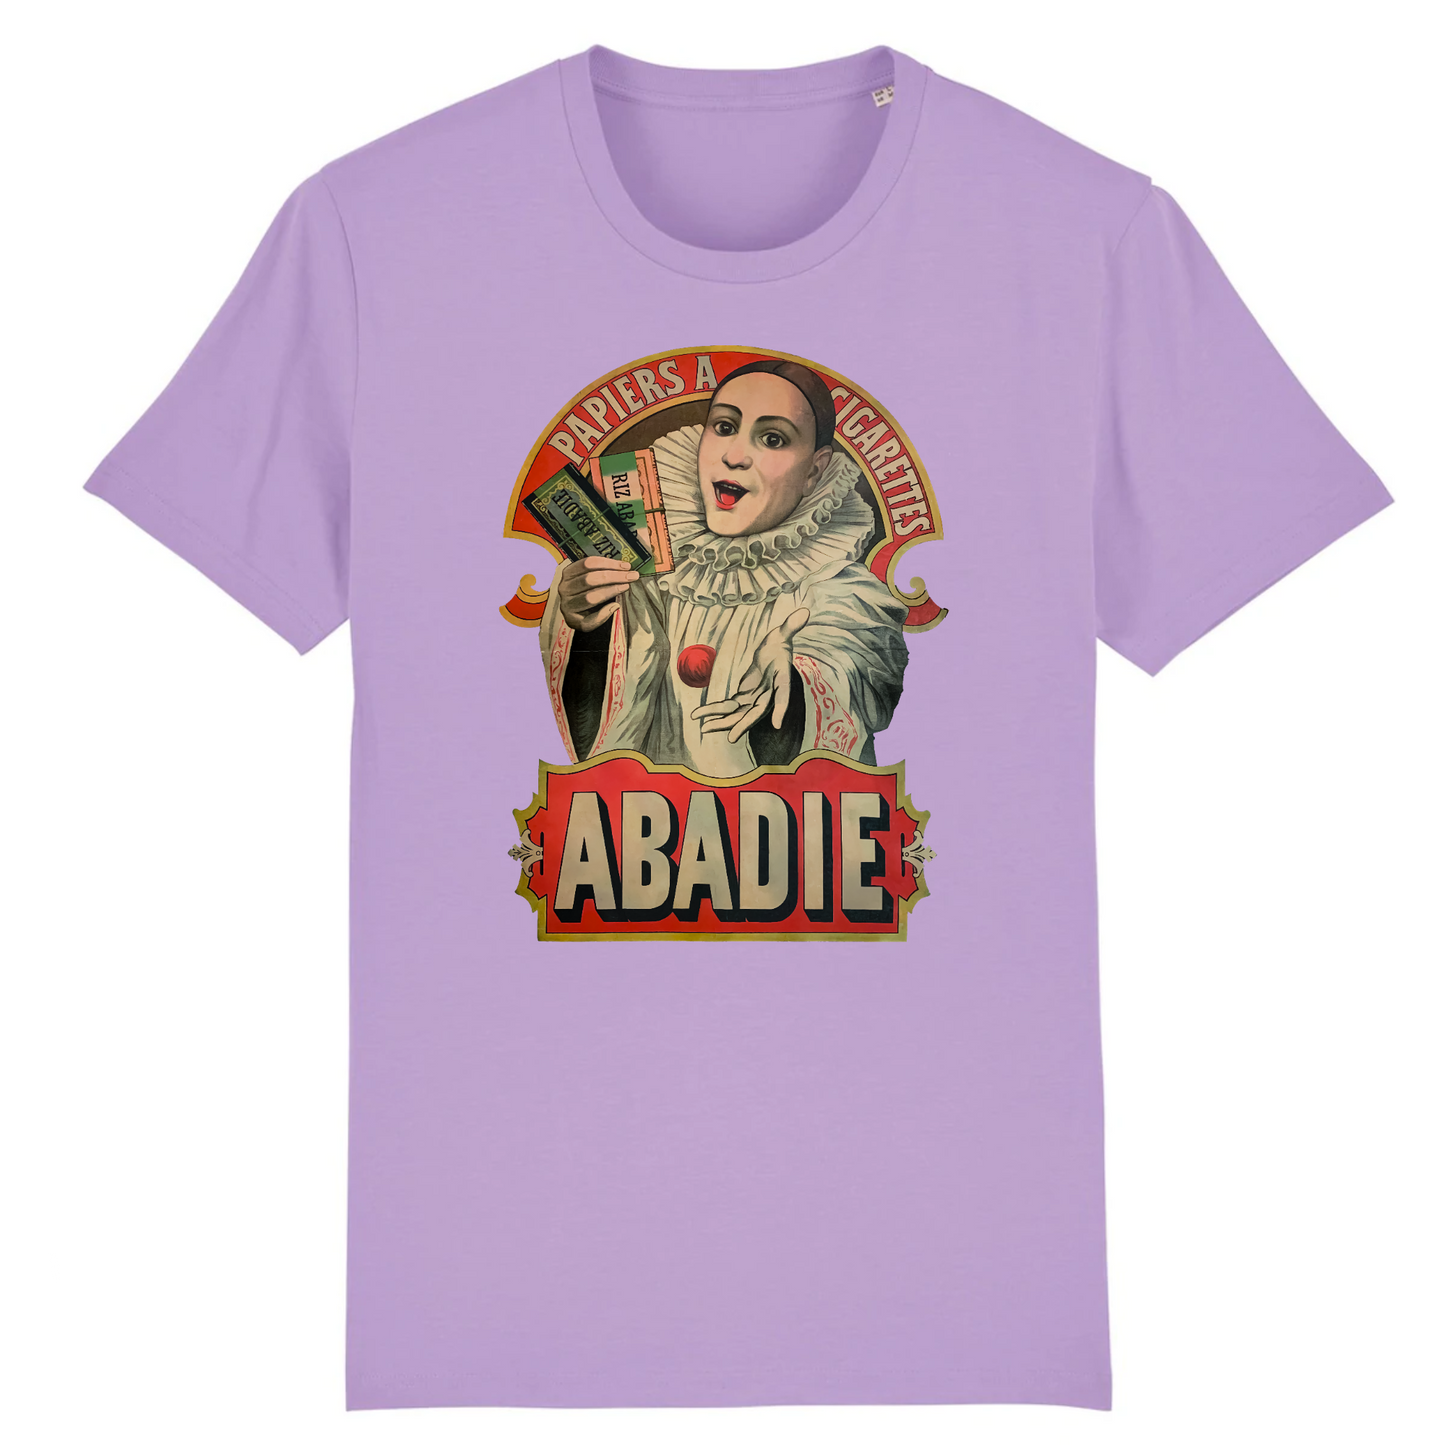 Abadie Cigarette Papers, 1895 - Organic Cotton T-Shirt